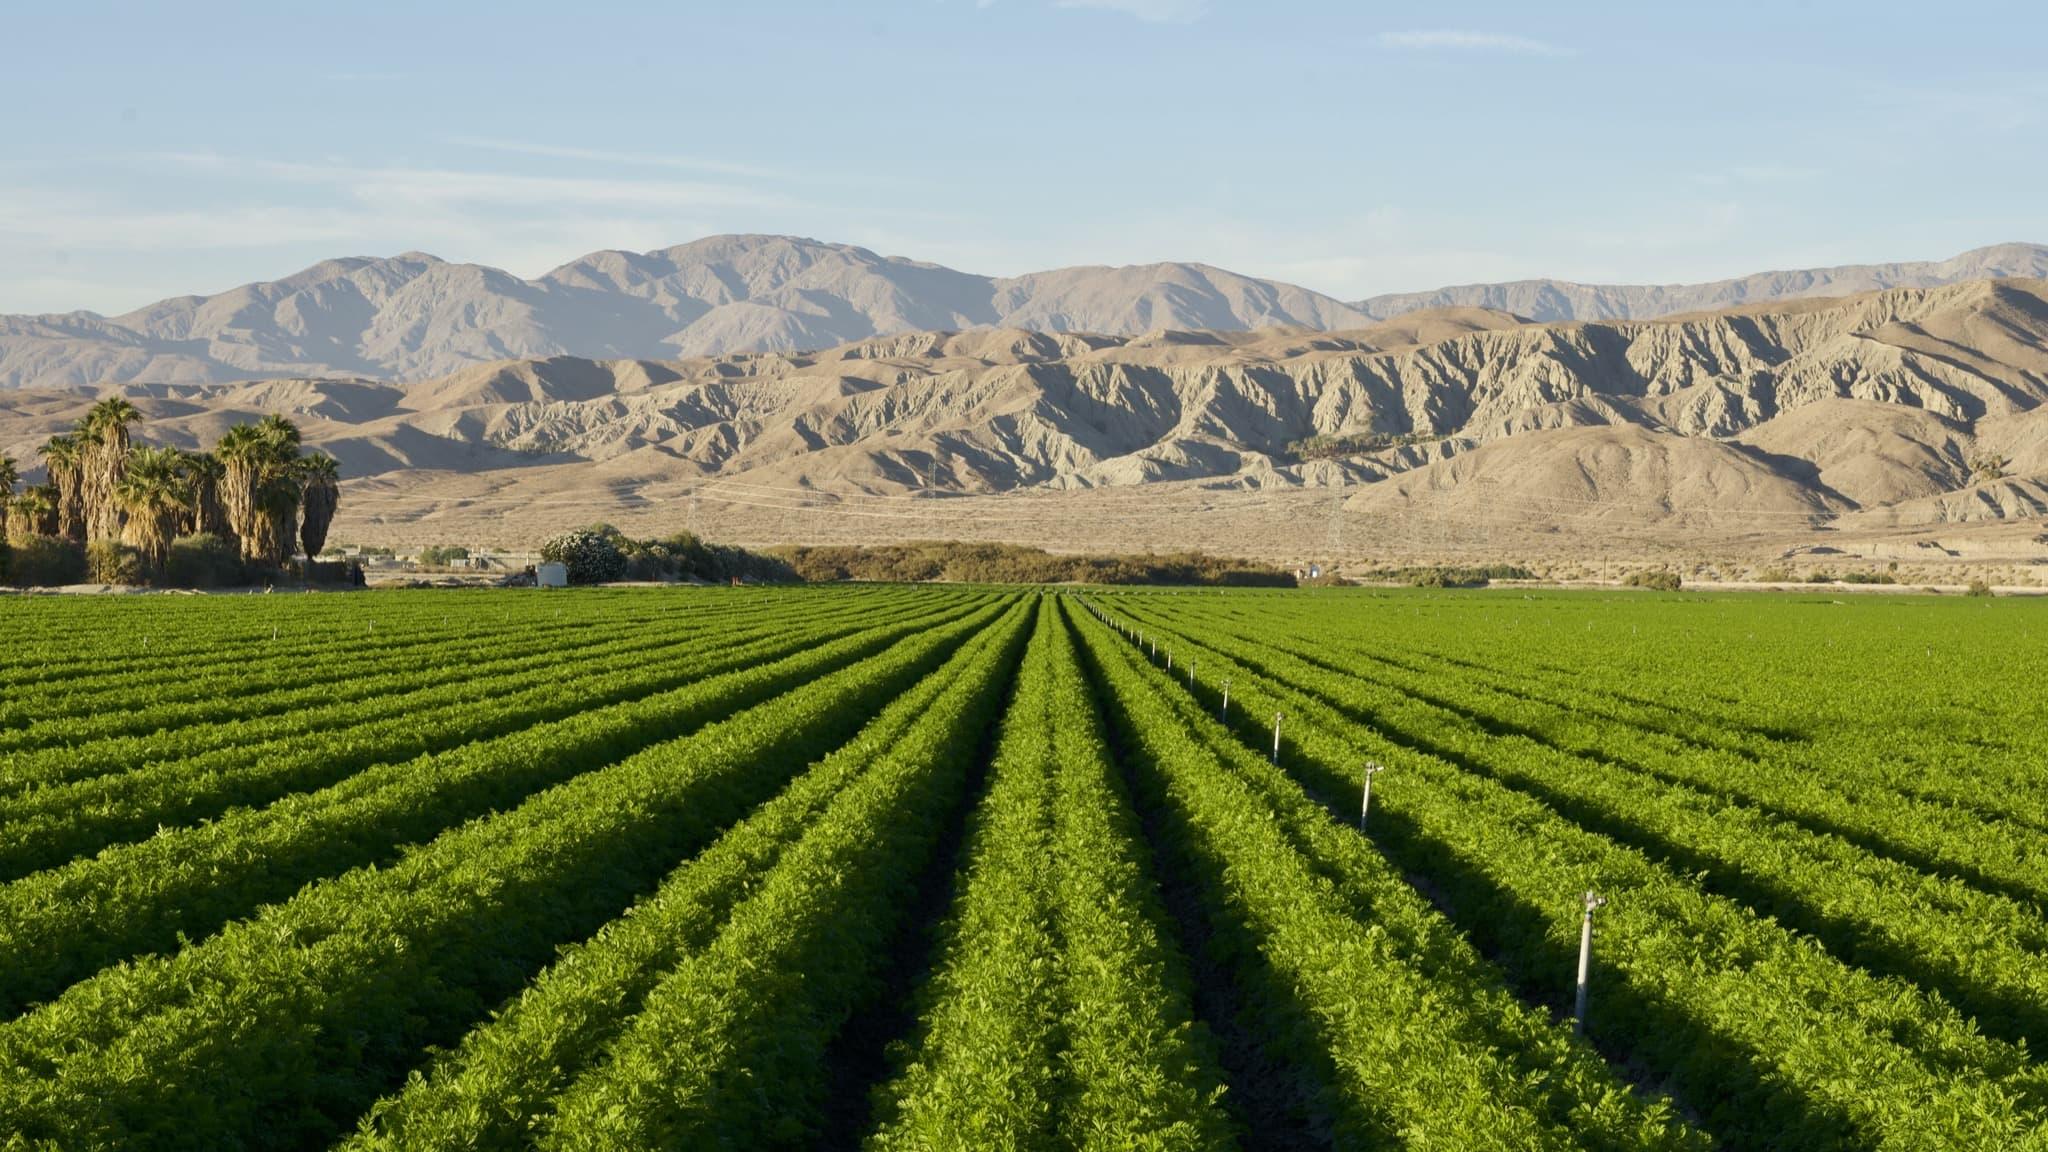 Rows of crops grown in imperial valley